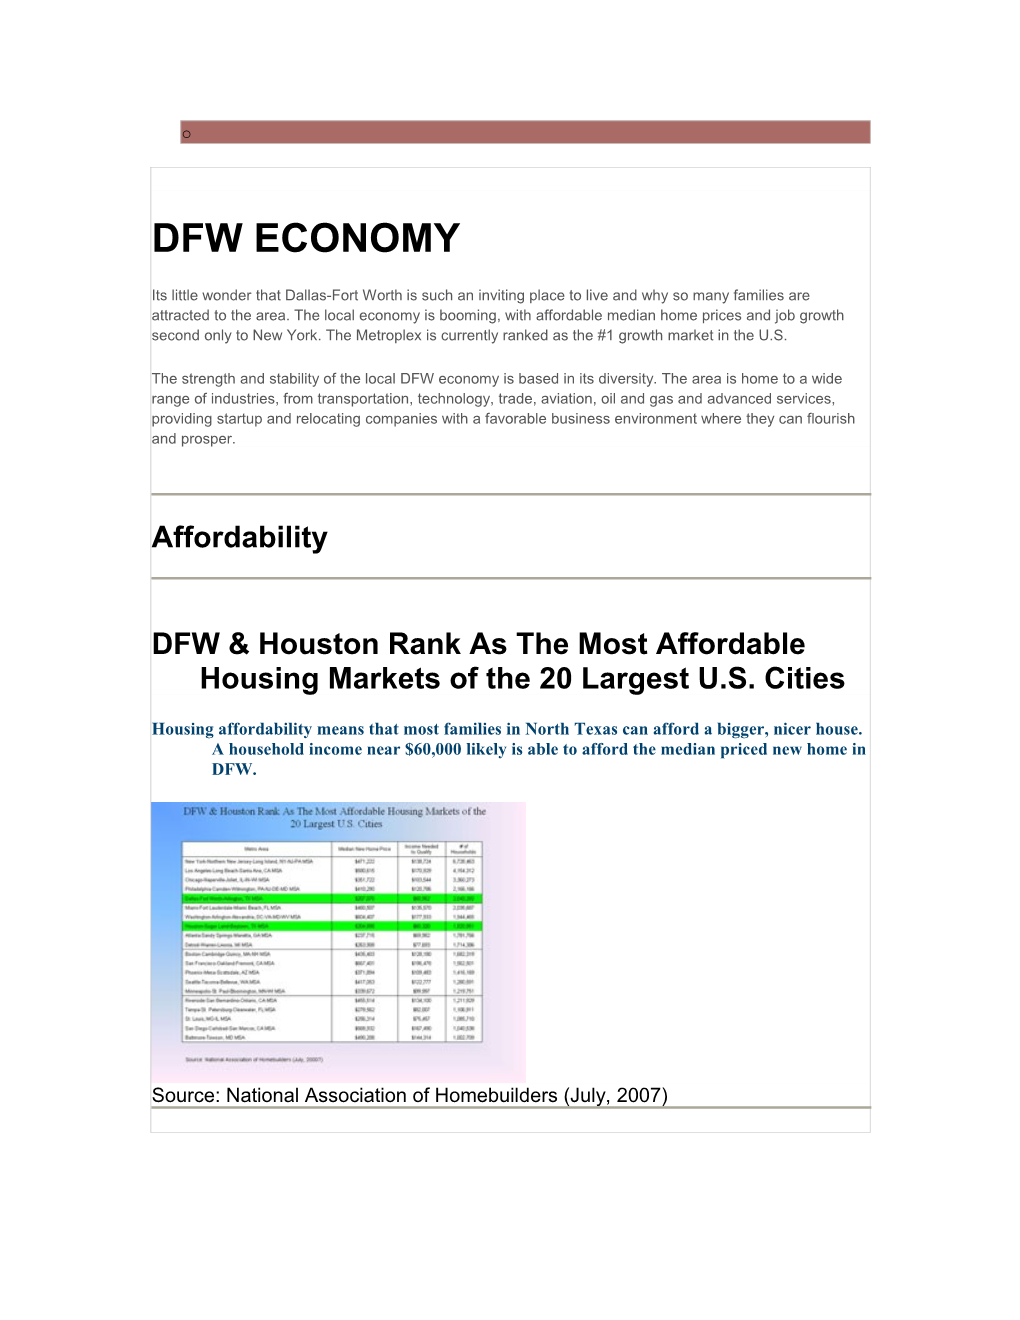 DFW & Houston Rank As the Most Affordable Housing Markets of the 20 Largest U.S. Cities